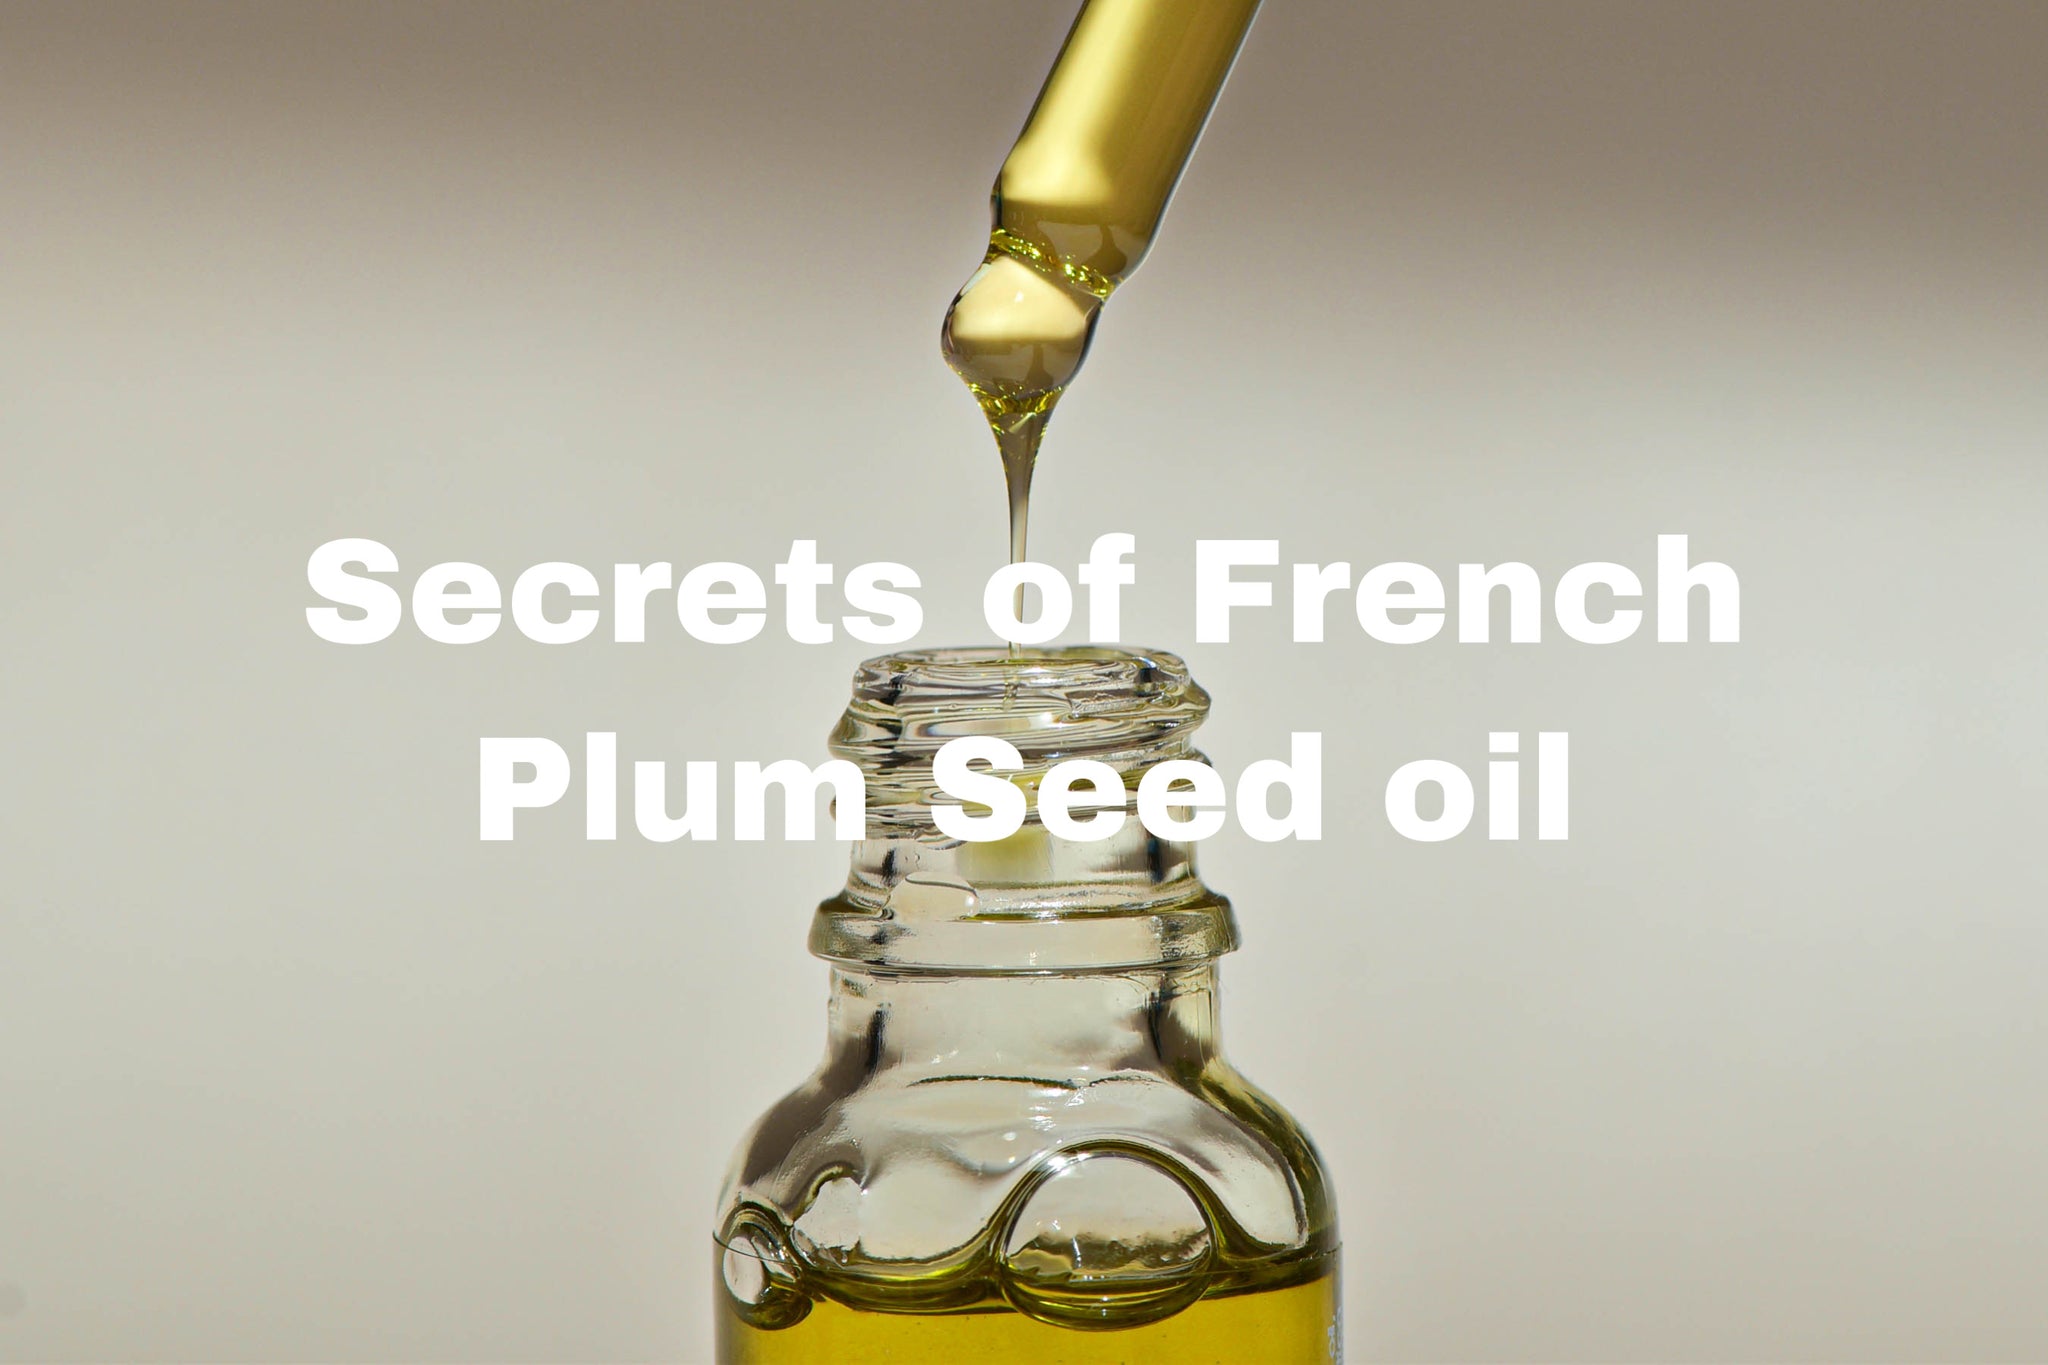 Secrets of French Organic Plum Seed Oil